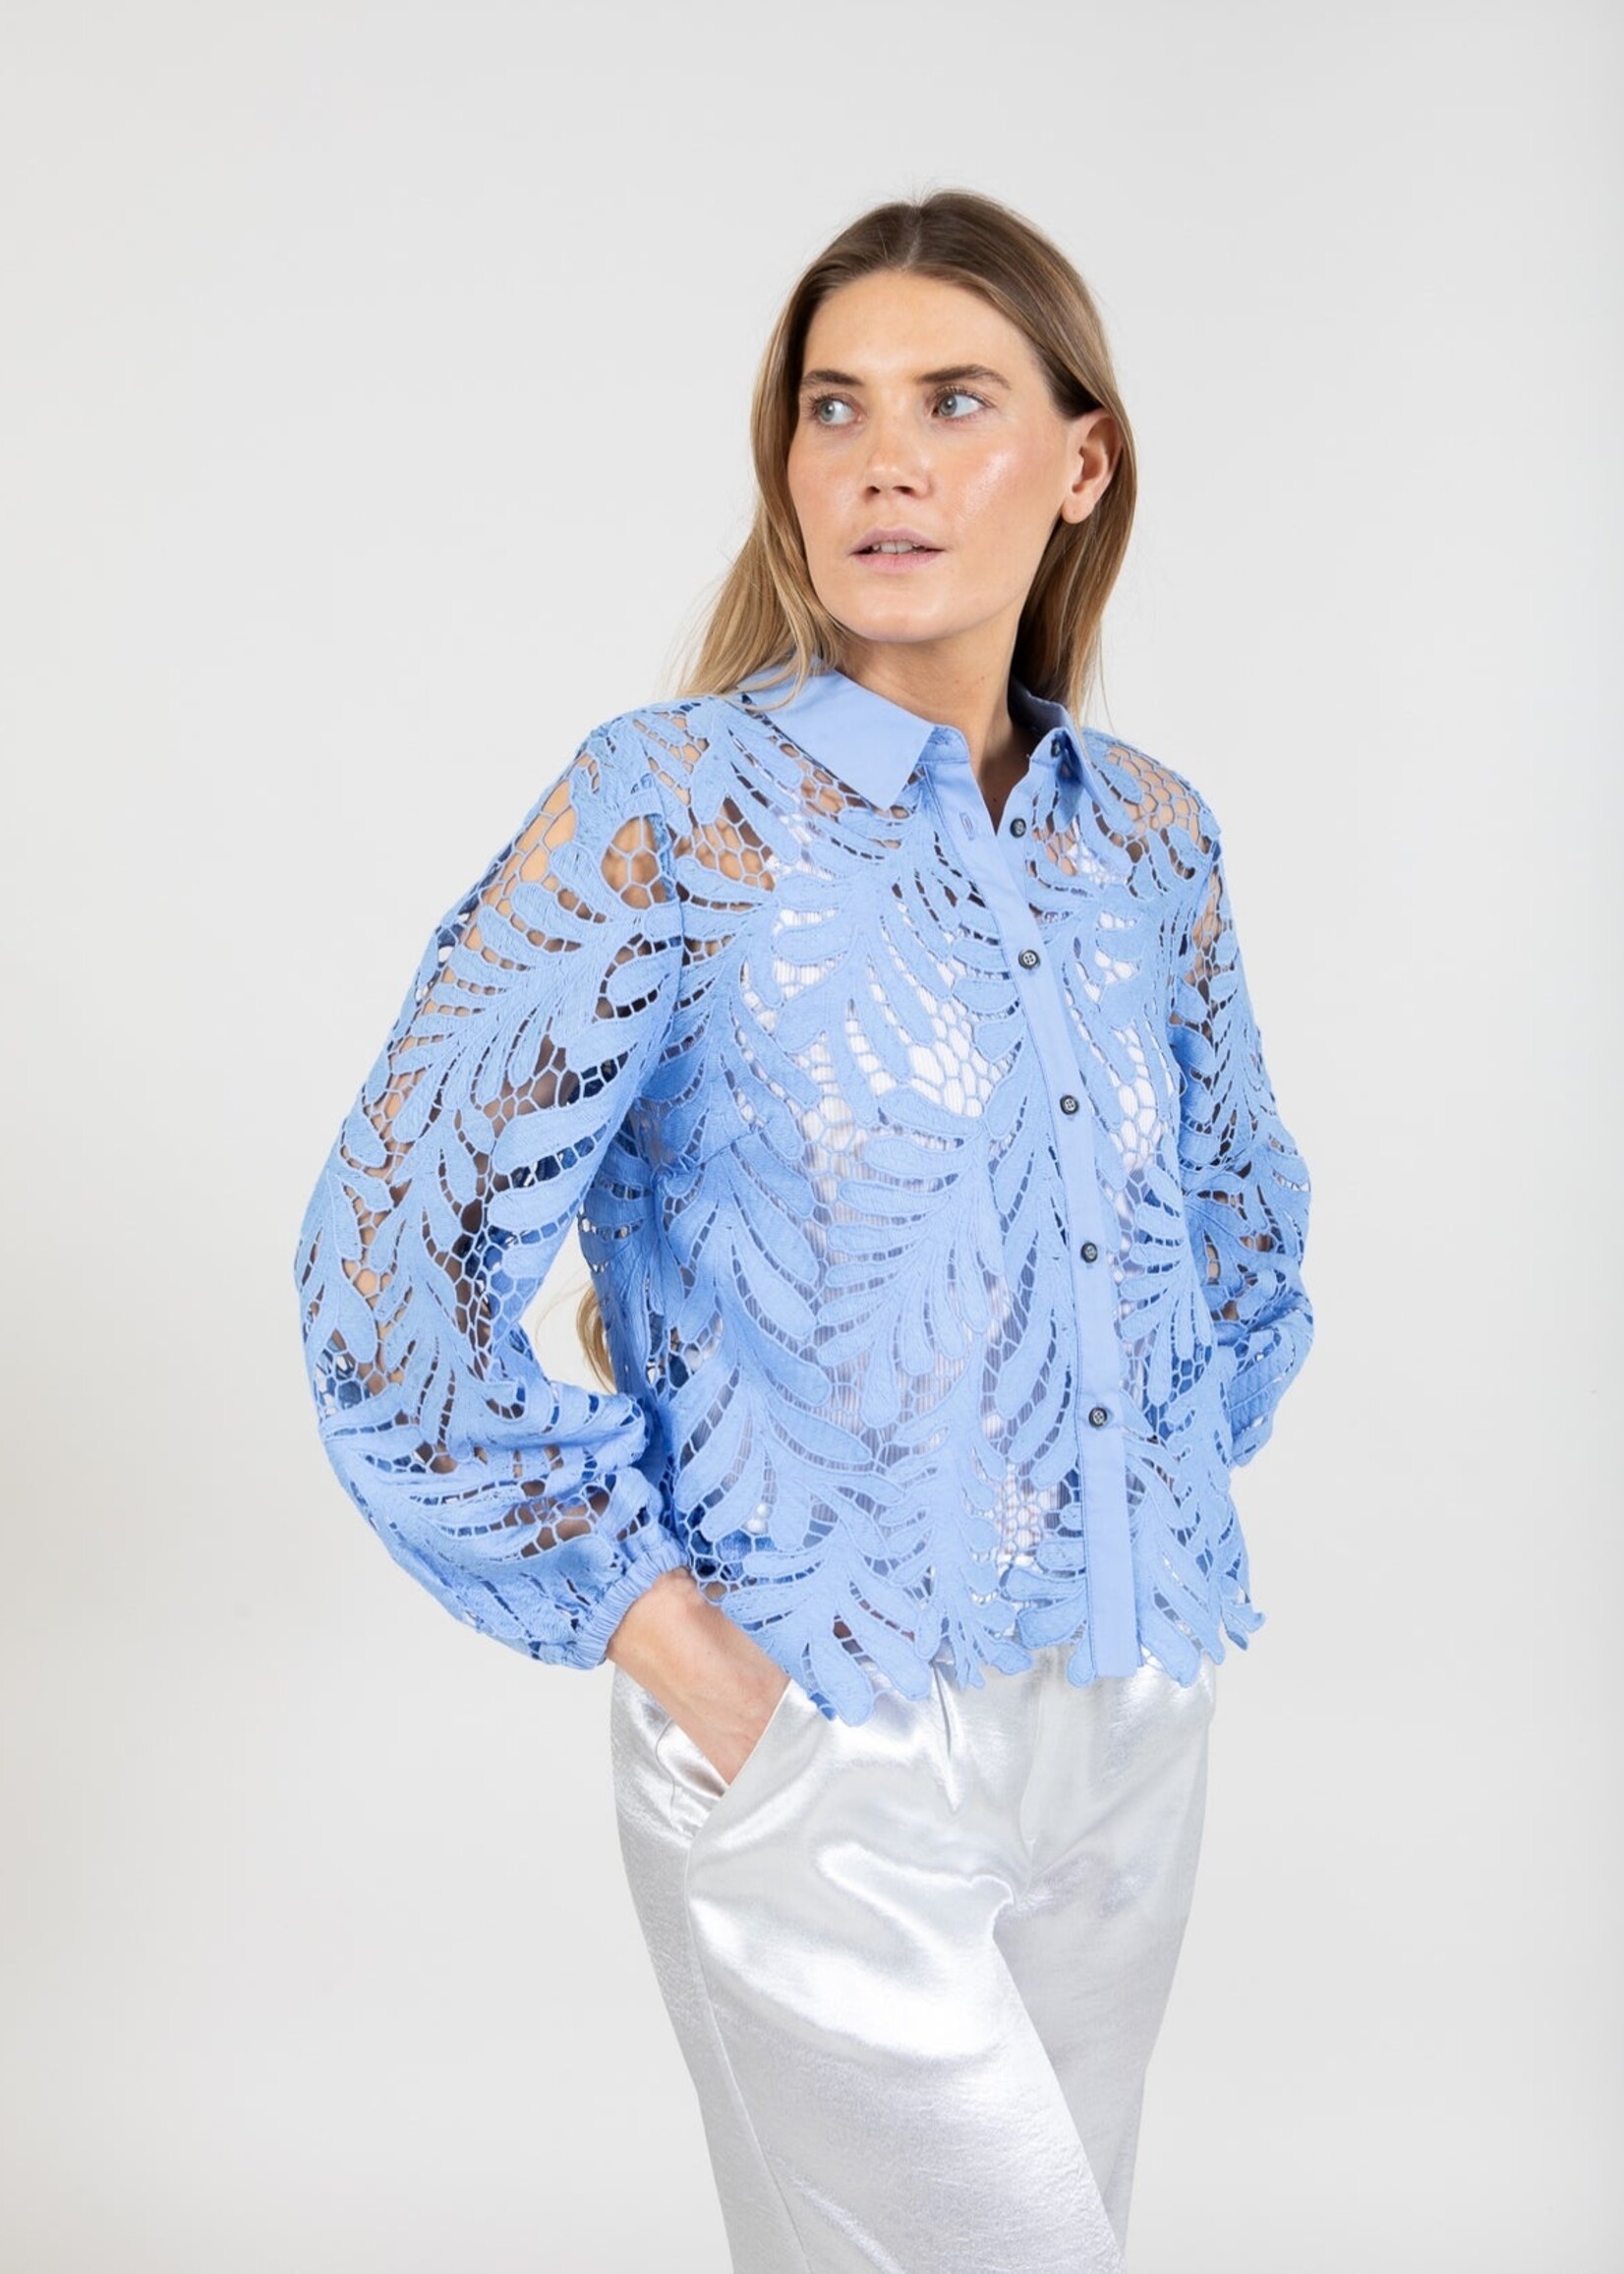 COSTER Lace Blouse